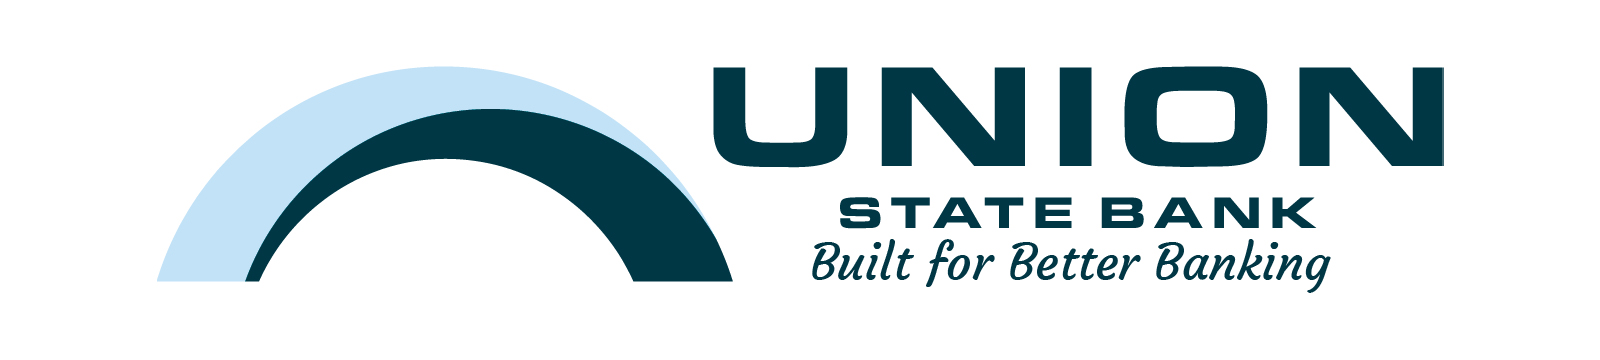 Union State Bank logo with the Built for Better Banking tagline attached.